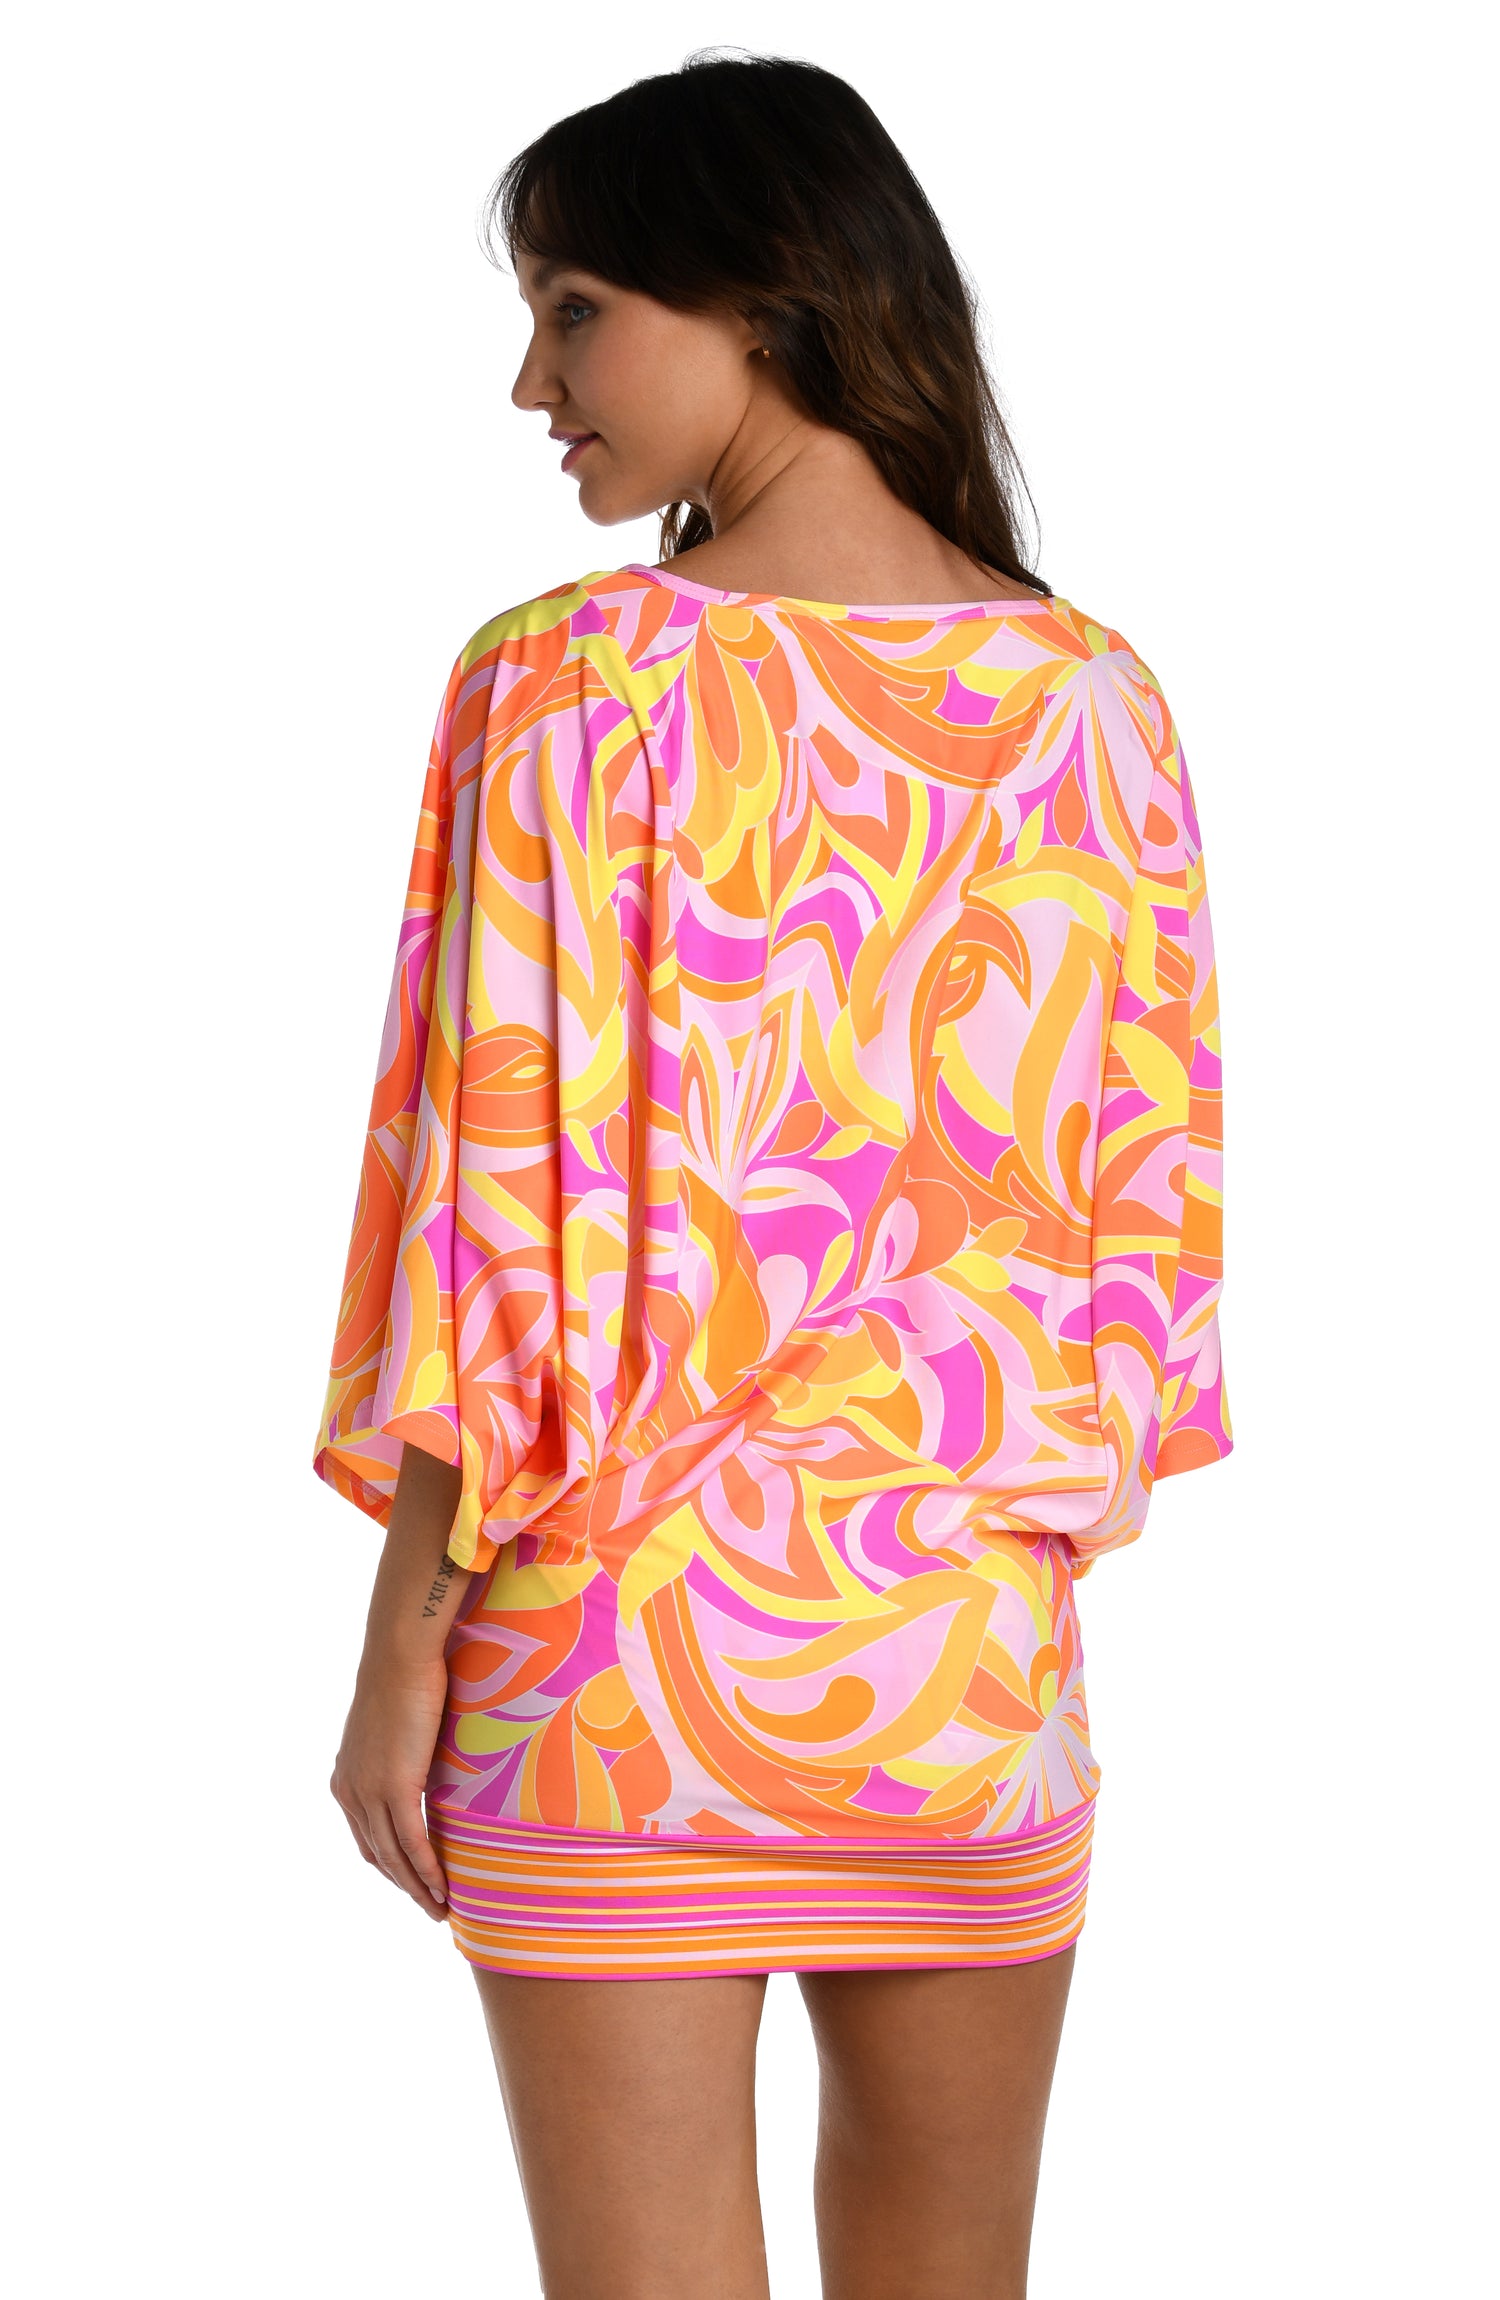 Model is wearing a pink, white, and orange multicolored retro printed short sleeve tunic cover up from our Retro Swirl collection.